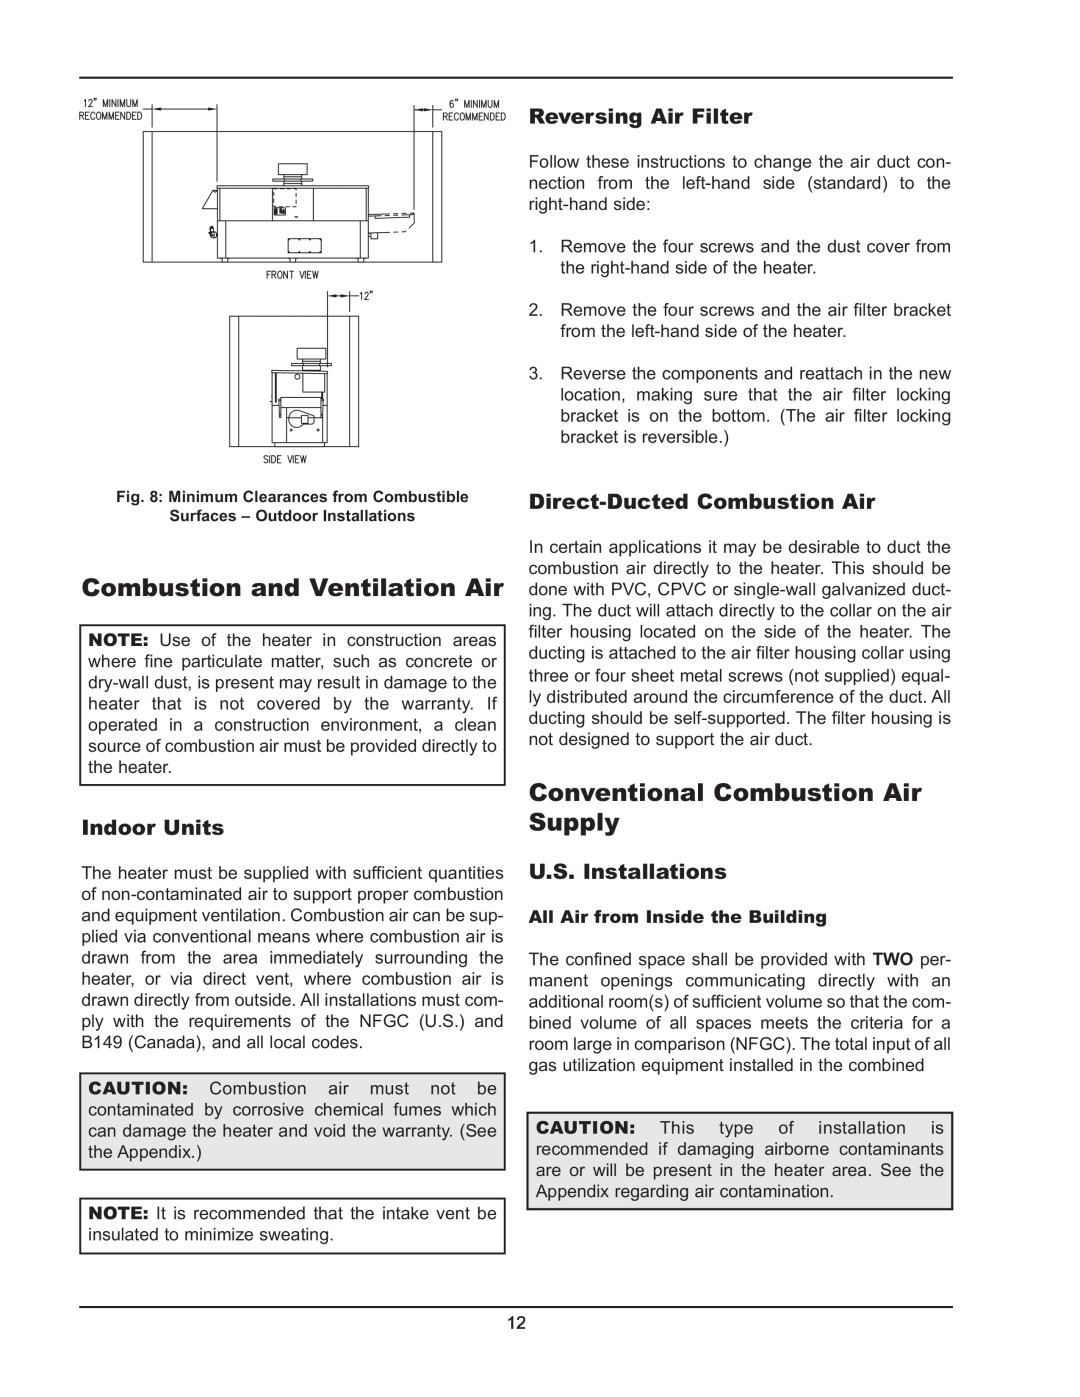 Raypak 399B-2339B Combustion and Ventilation Air, Conventional Combustion Air Supply, Indoor Units, Reversing Air Filter 